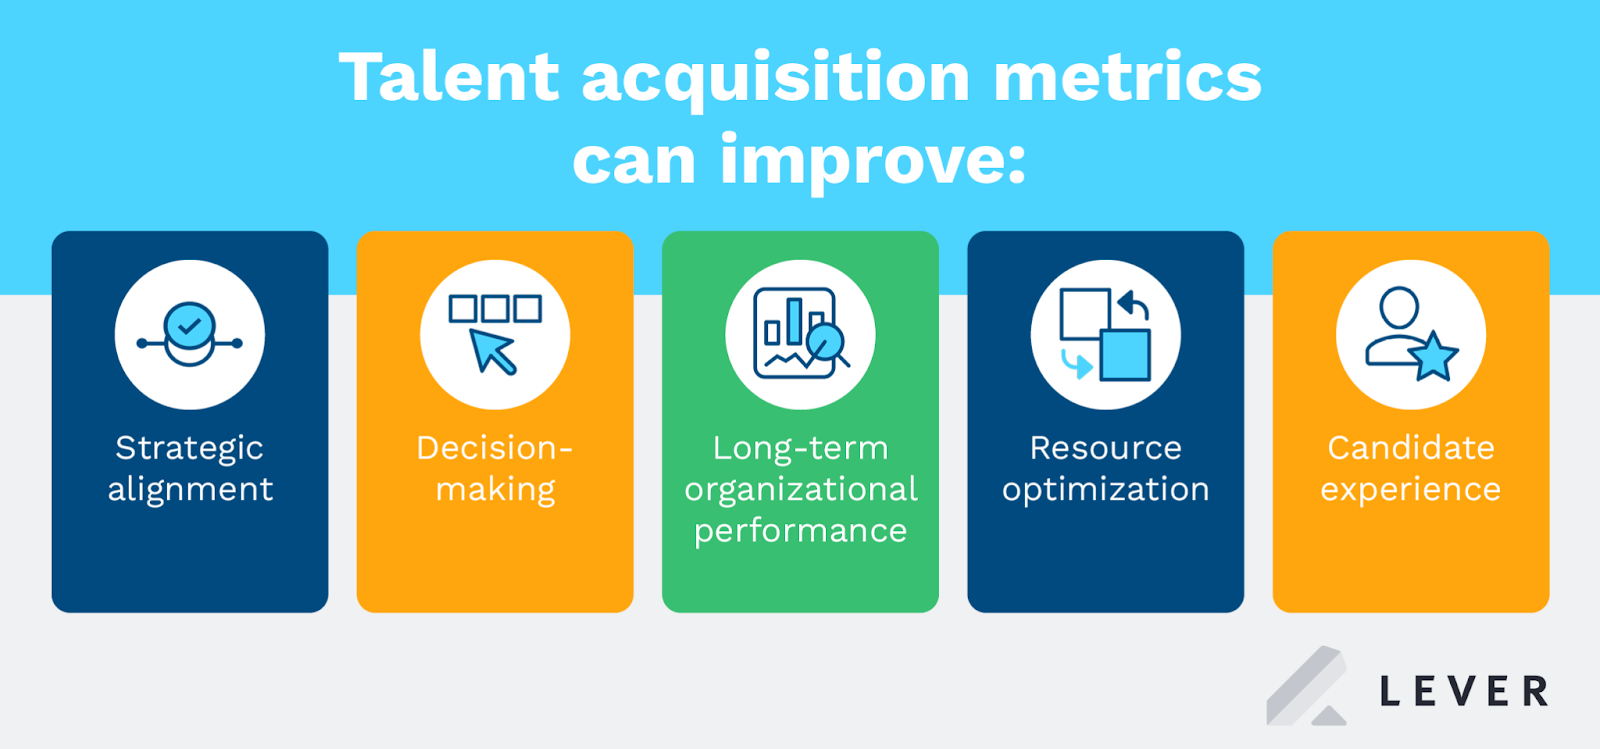 Various benefits of tracking talent acquisition metrics (as explained below)